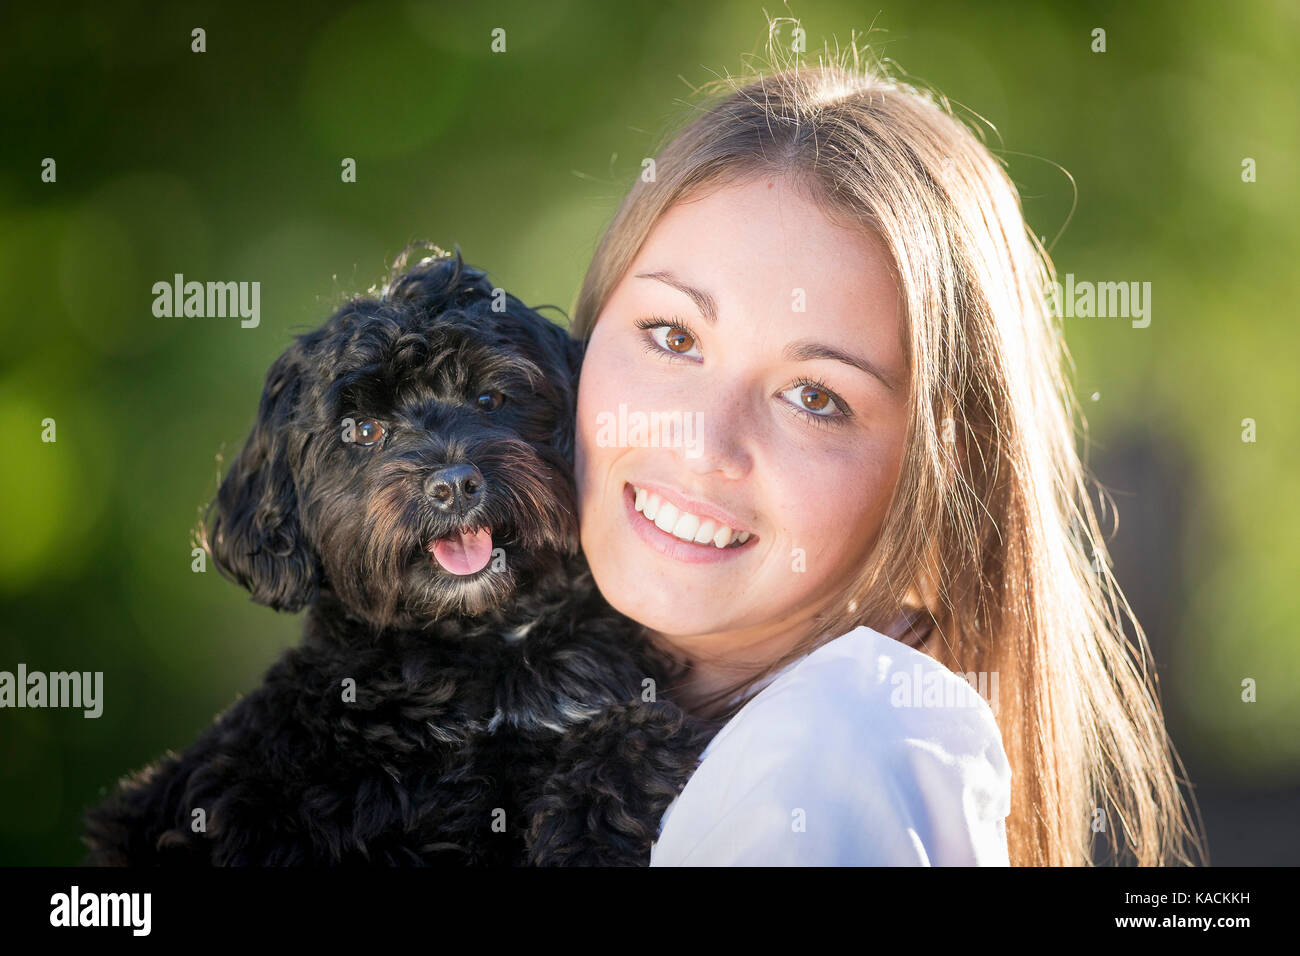 Maltipoo (Maltese x Toy Poodle). Smiling woman cheek to cheek with black and tan dog. Germany Stock Photo